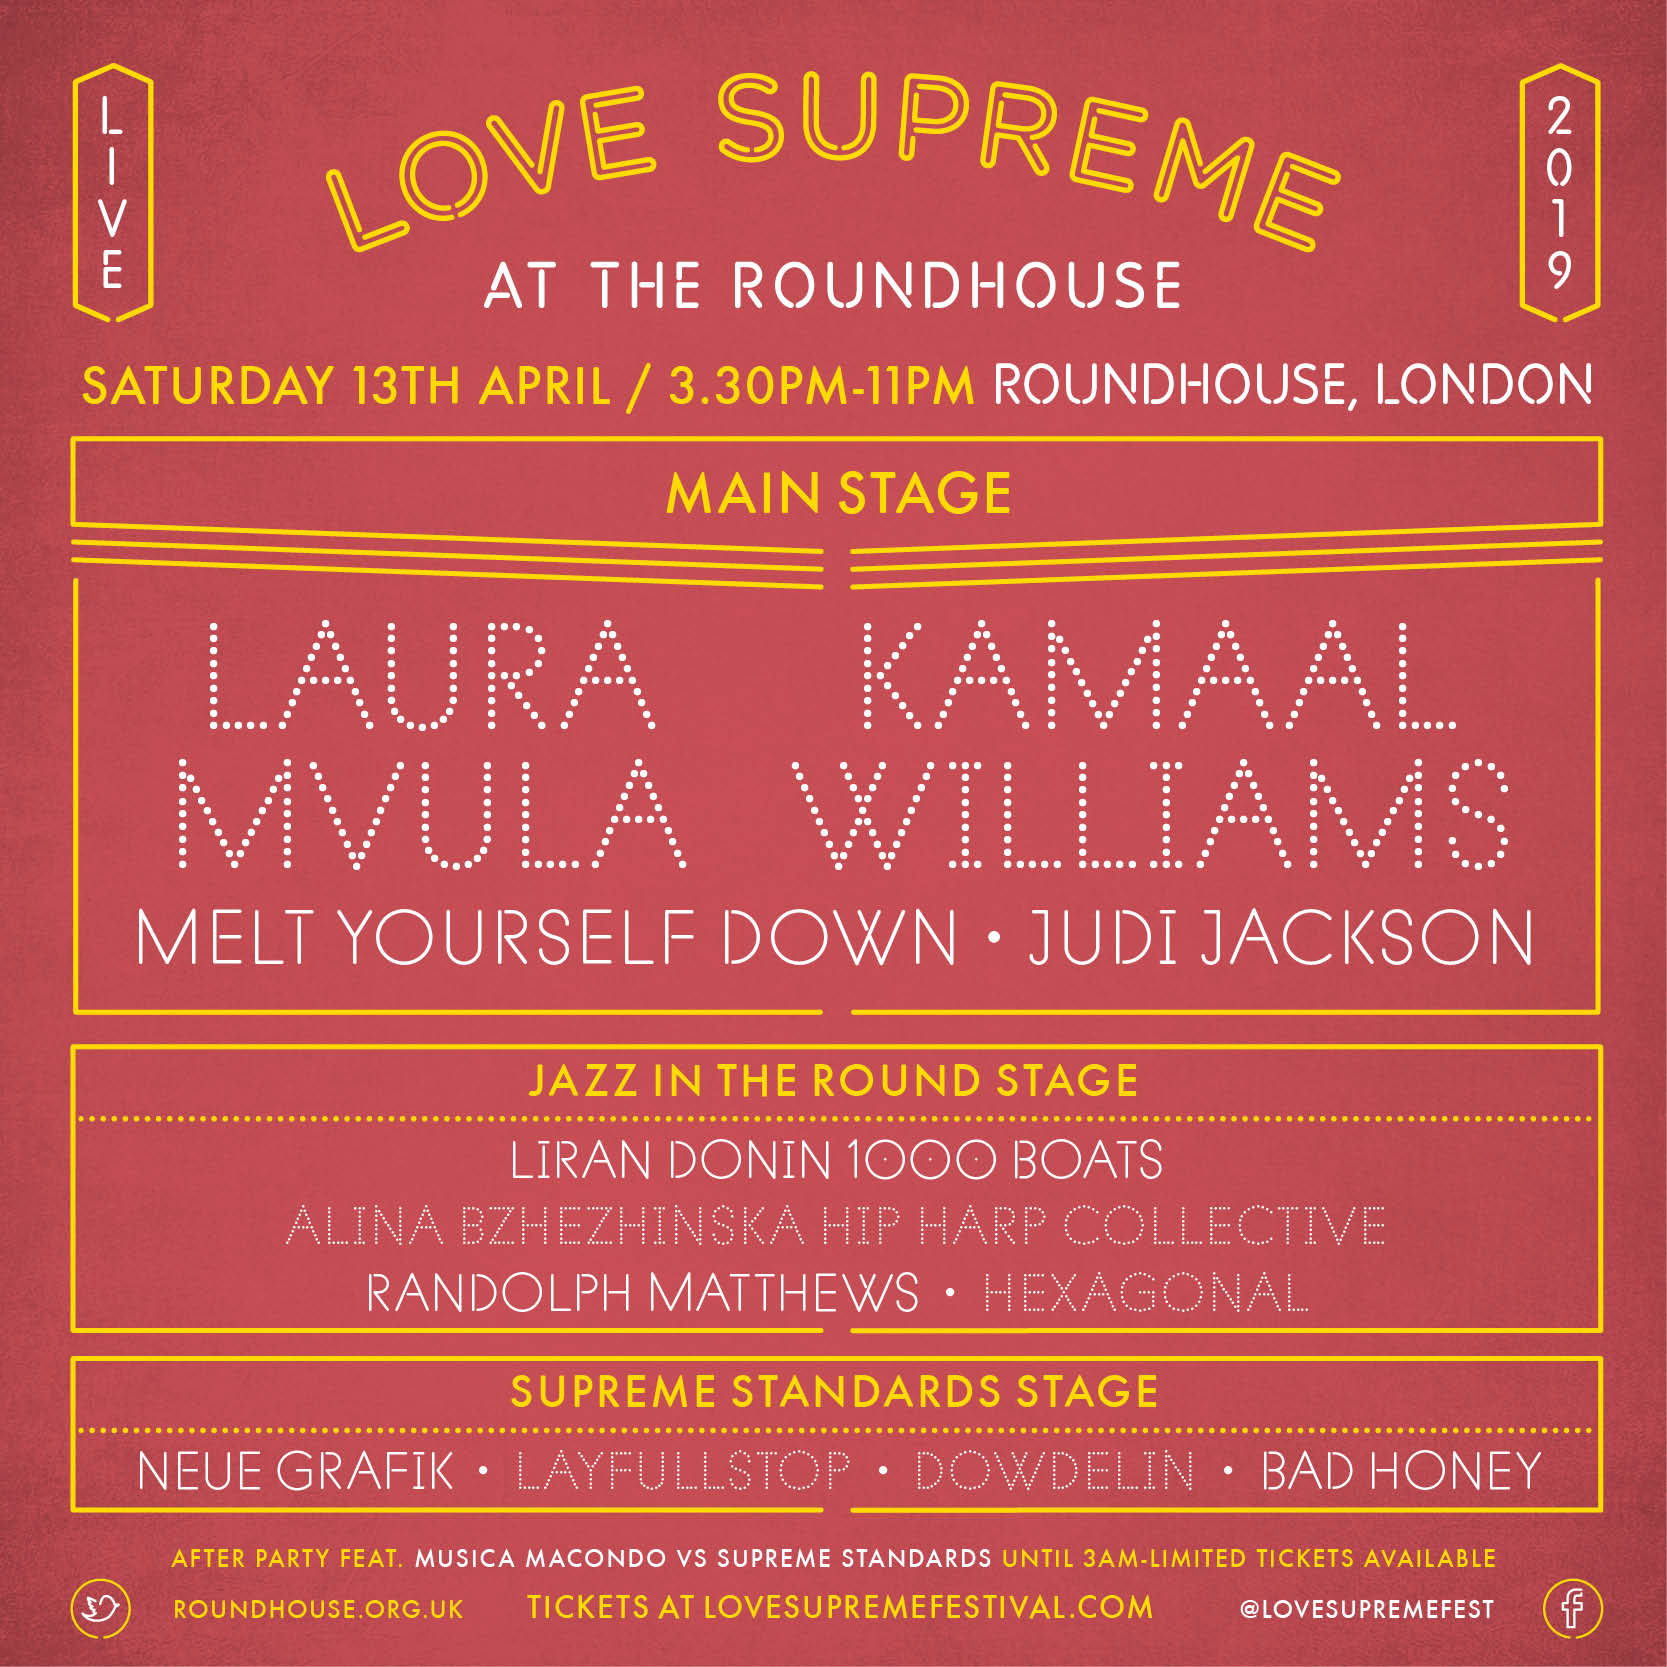 Buy Love Supreme at Roundhouse tickets, Love Supreme at Roundhouse tour